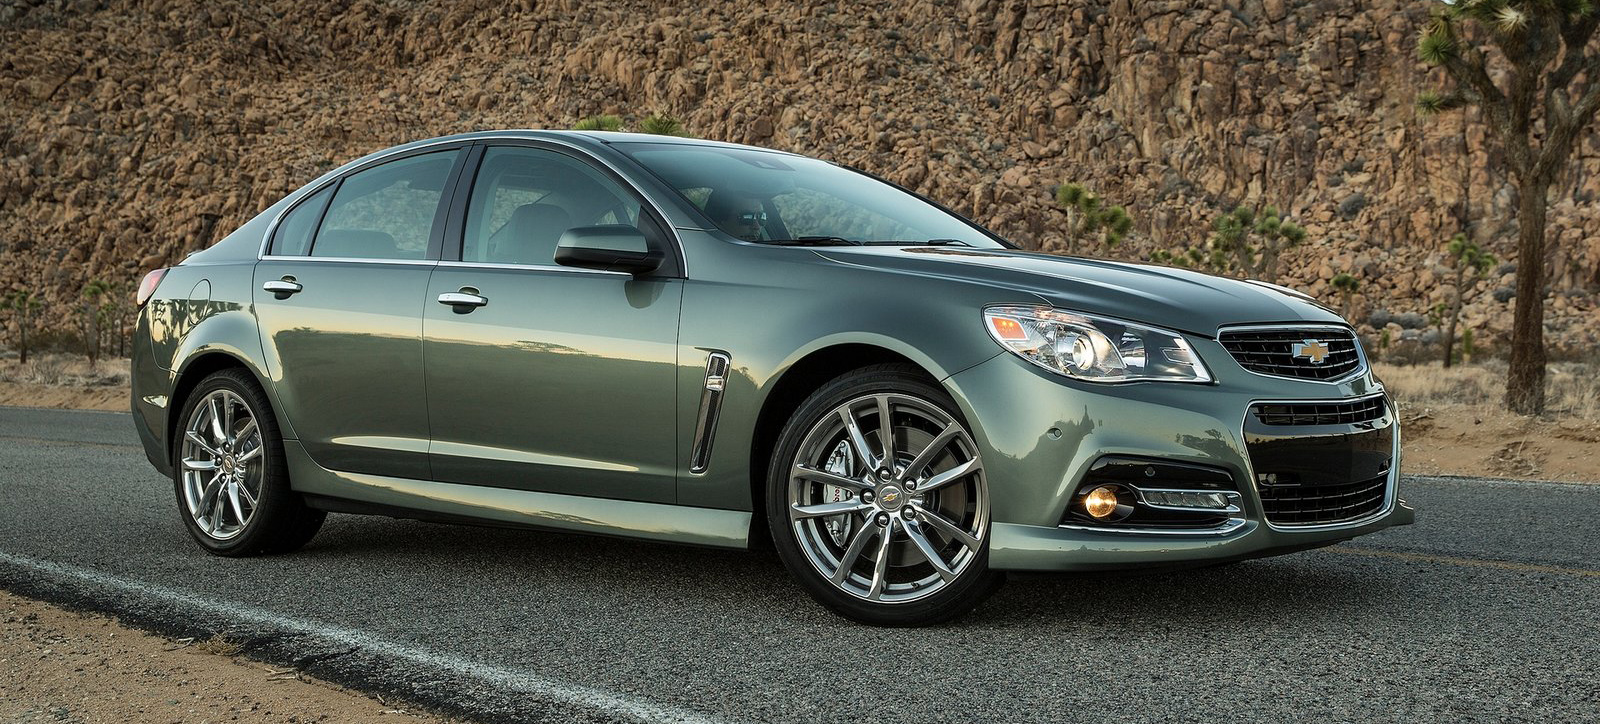 Why the Chevrolet SS is the Most Underrated Performance Car